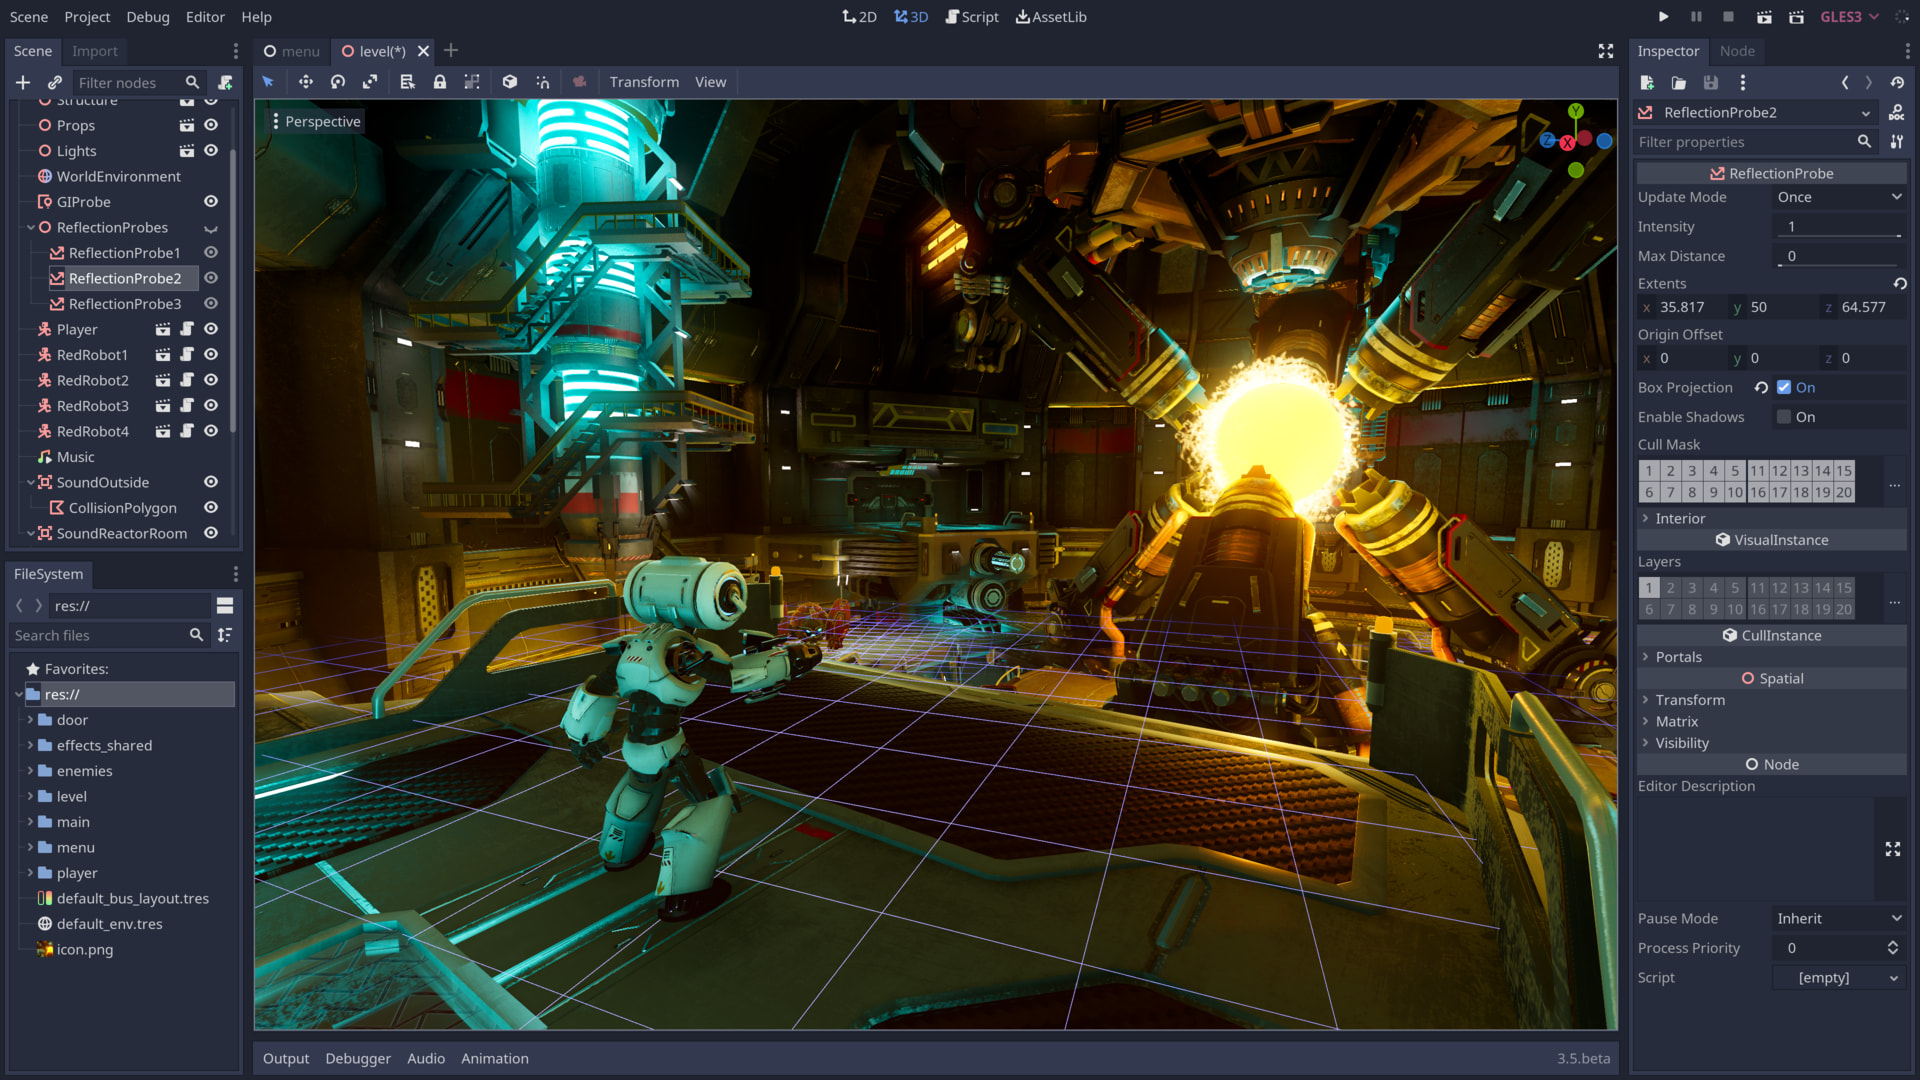 NeoAxis Engine, 3D and 2D game engine, switched to a new royalty